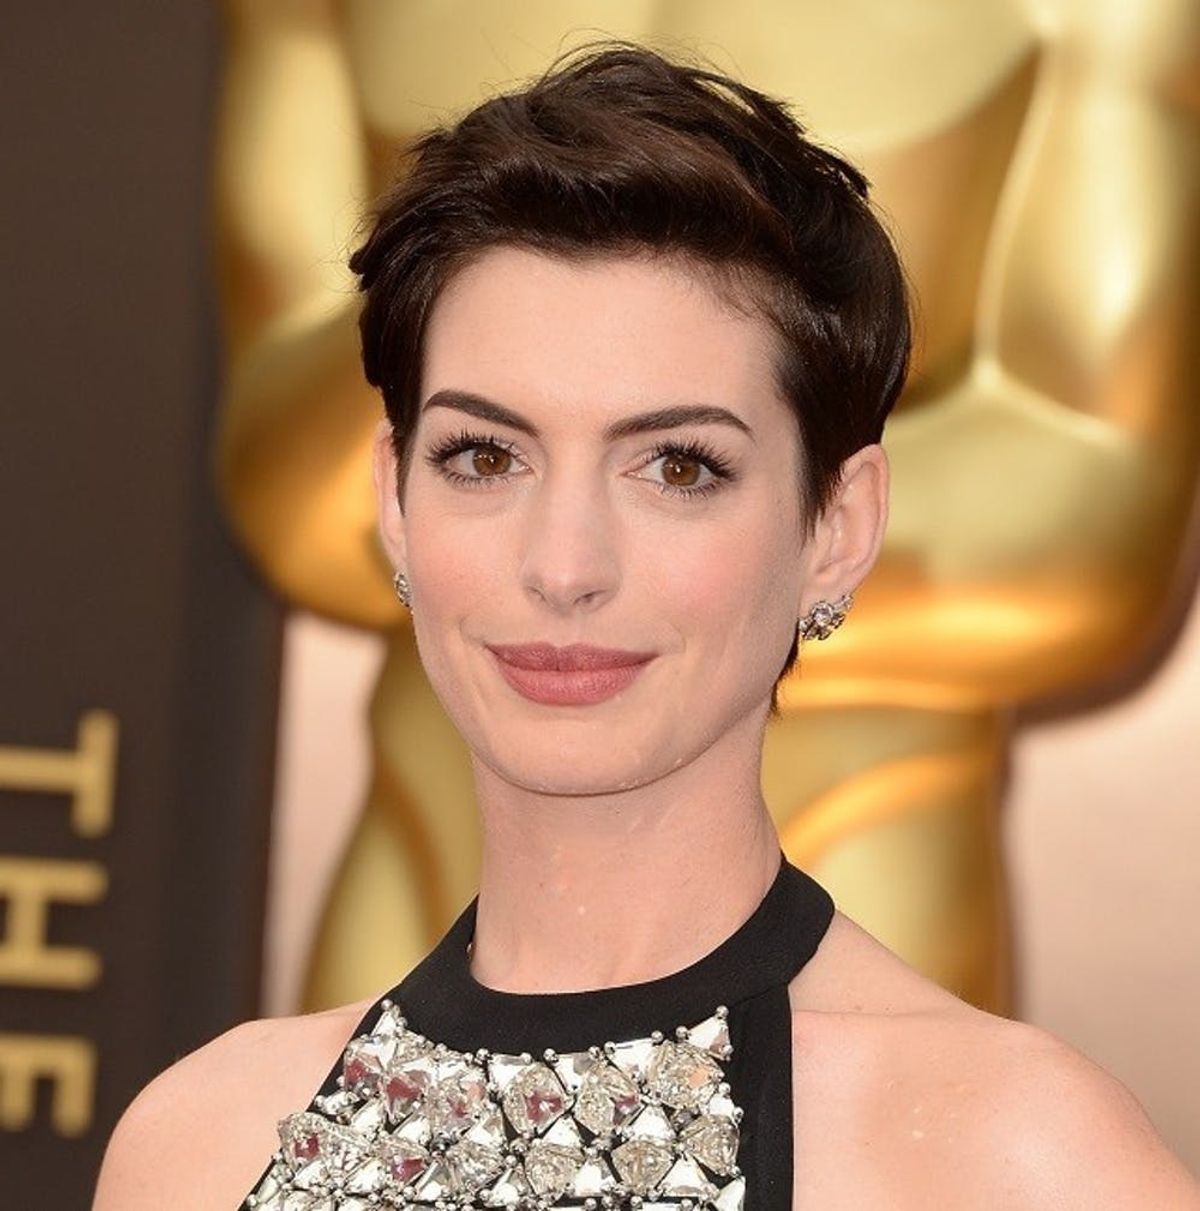 Anne Hathaway’s Oscars Update Is the Sweetest Baby Bump Selfie Ever